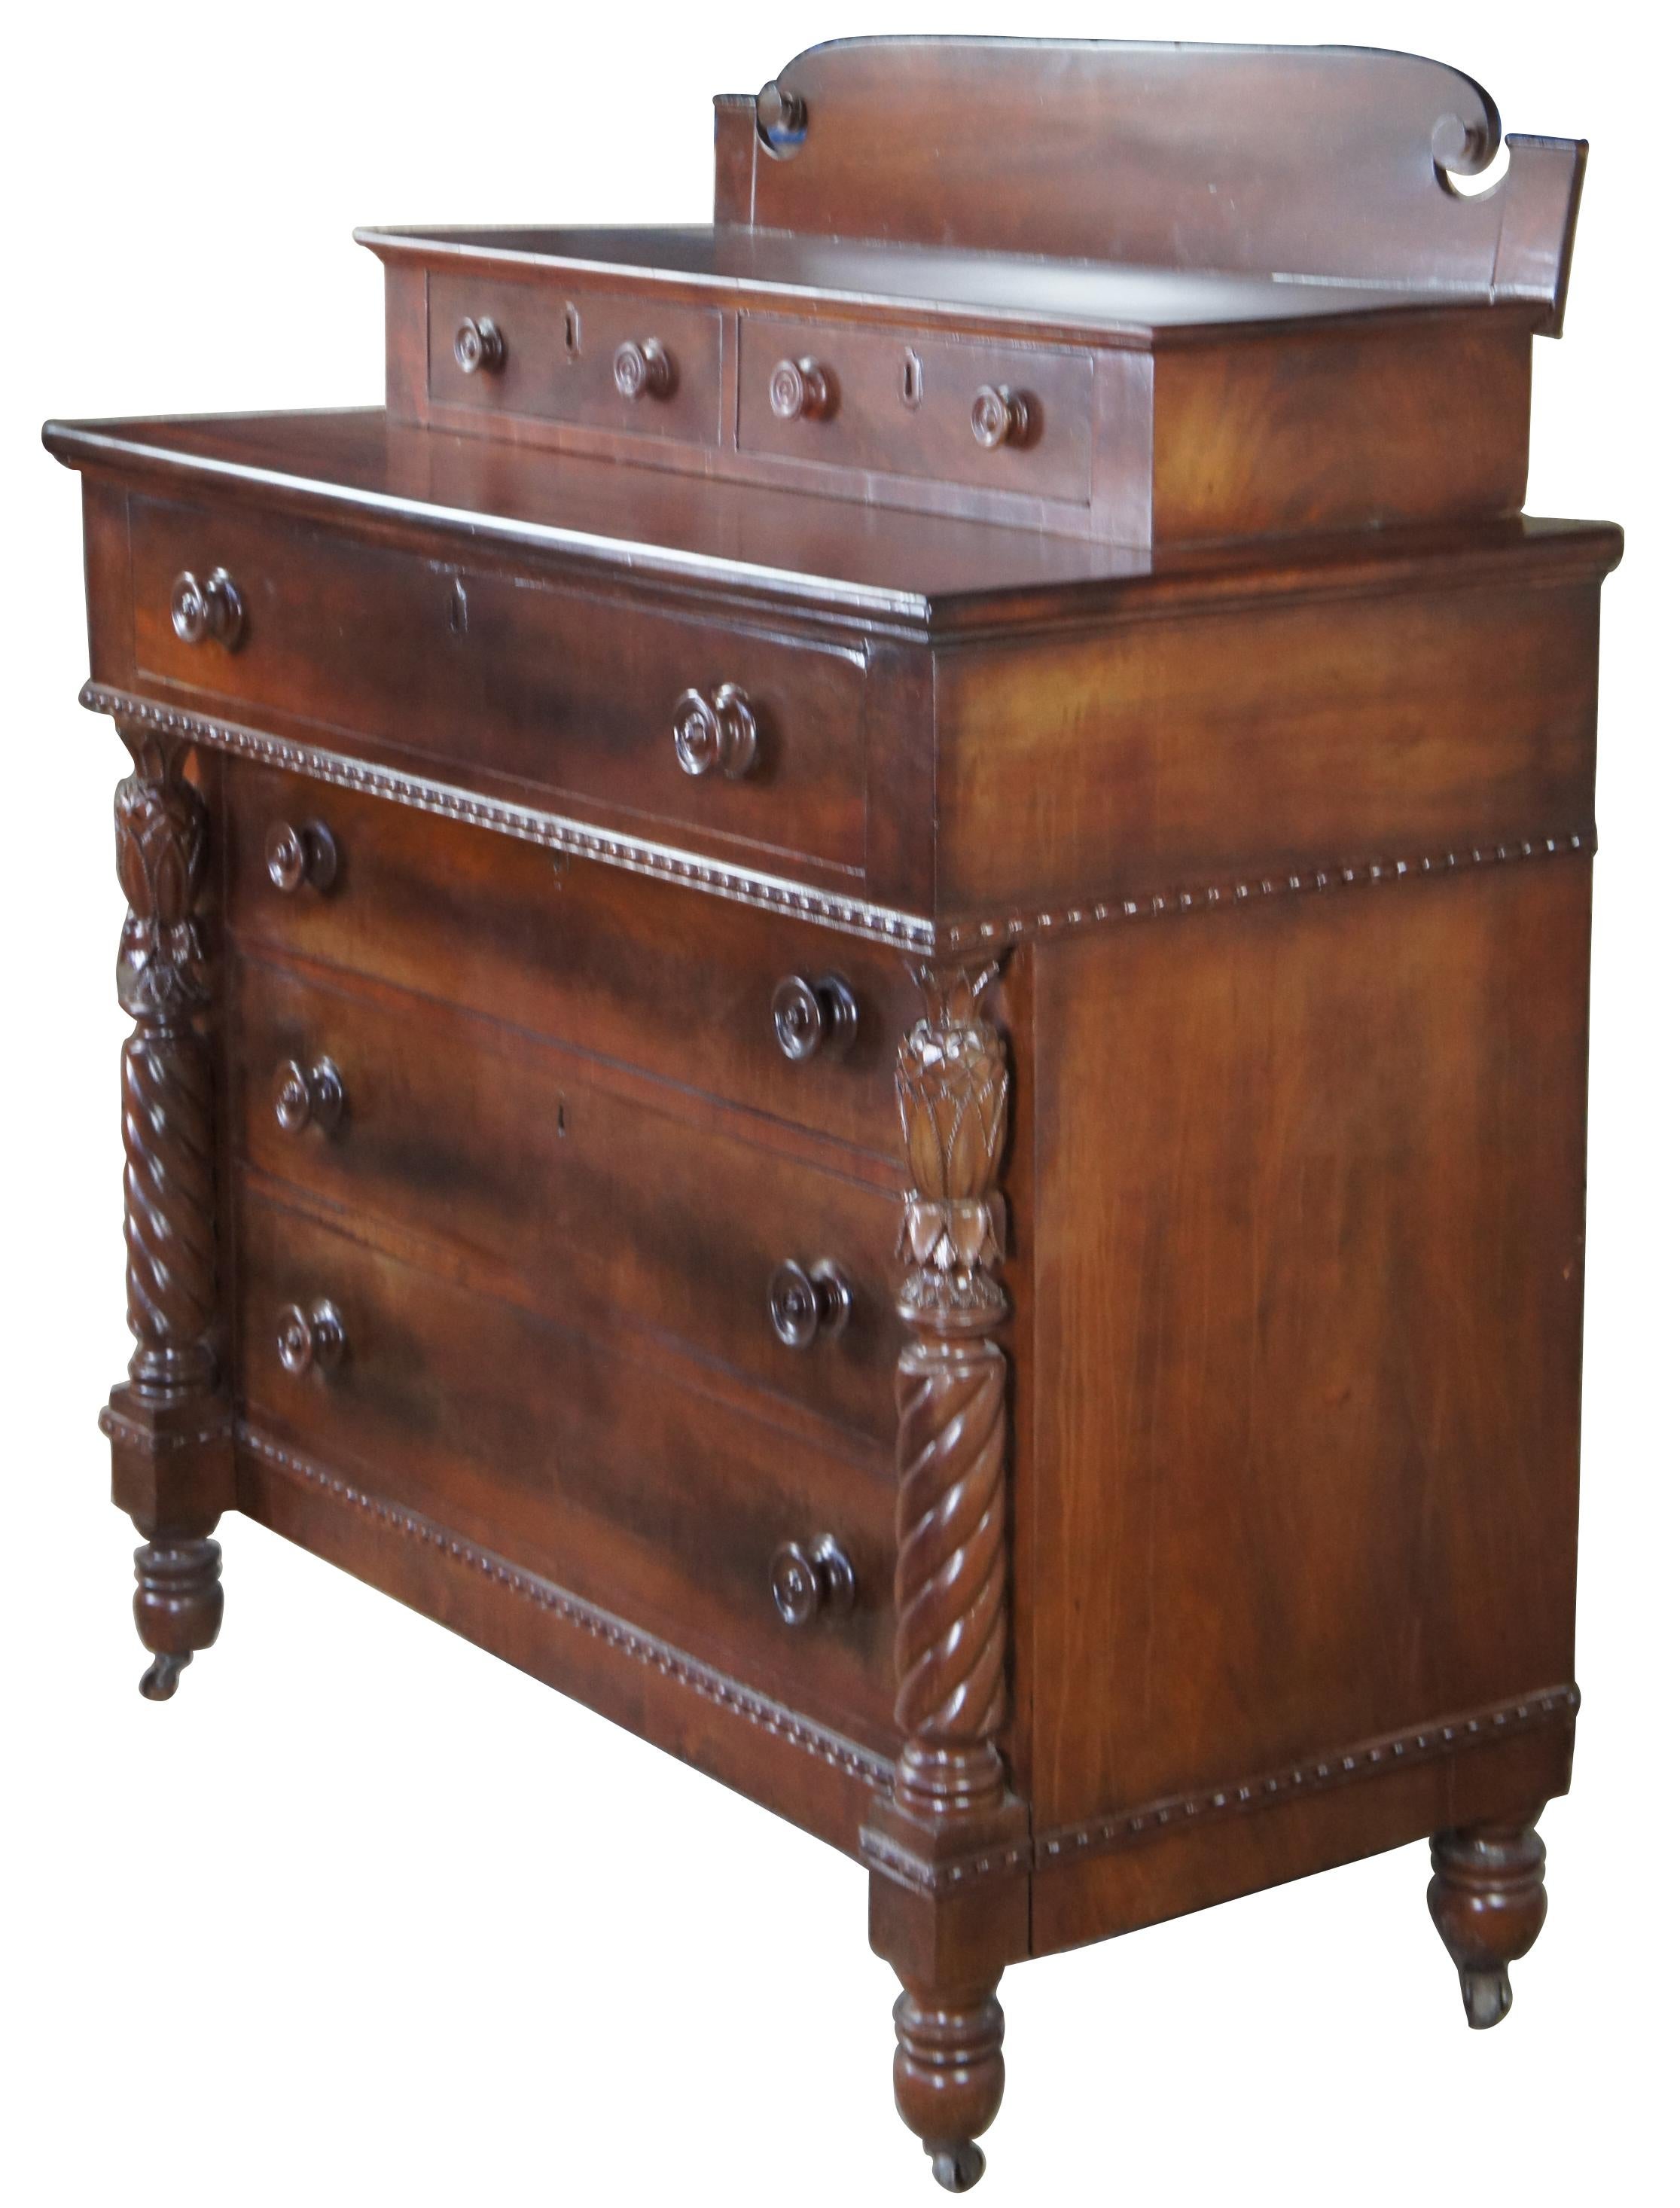 Early 19th Century American Empire finely carved chest of drawers, with pineapple topped, barley-twist columns. A rectangular form made from mahogany with crotch veneer along drawer fronts and stepback design featuring two glovebox drawers. Includes